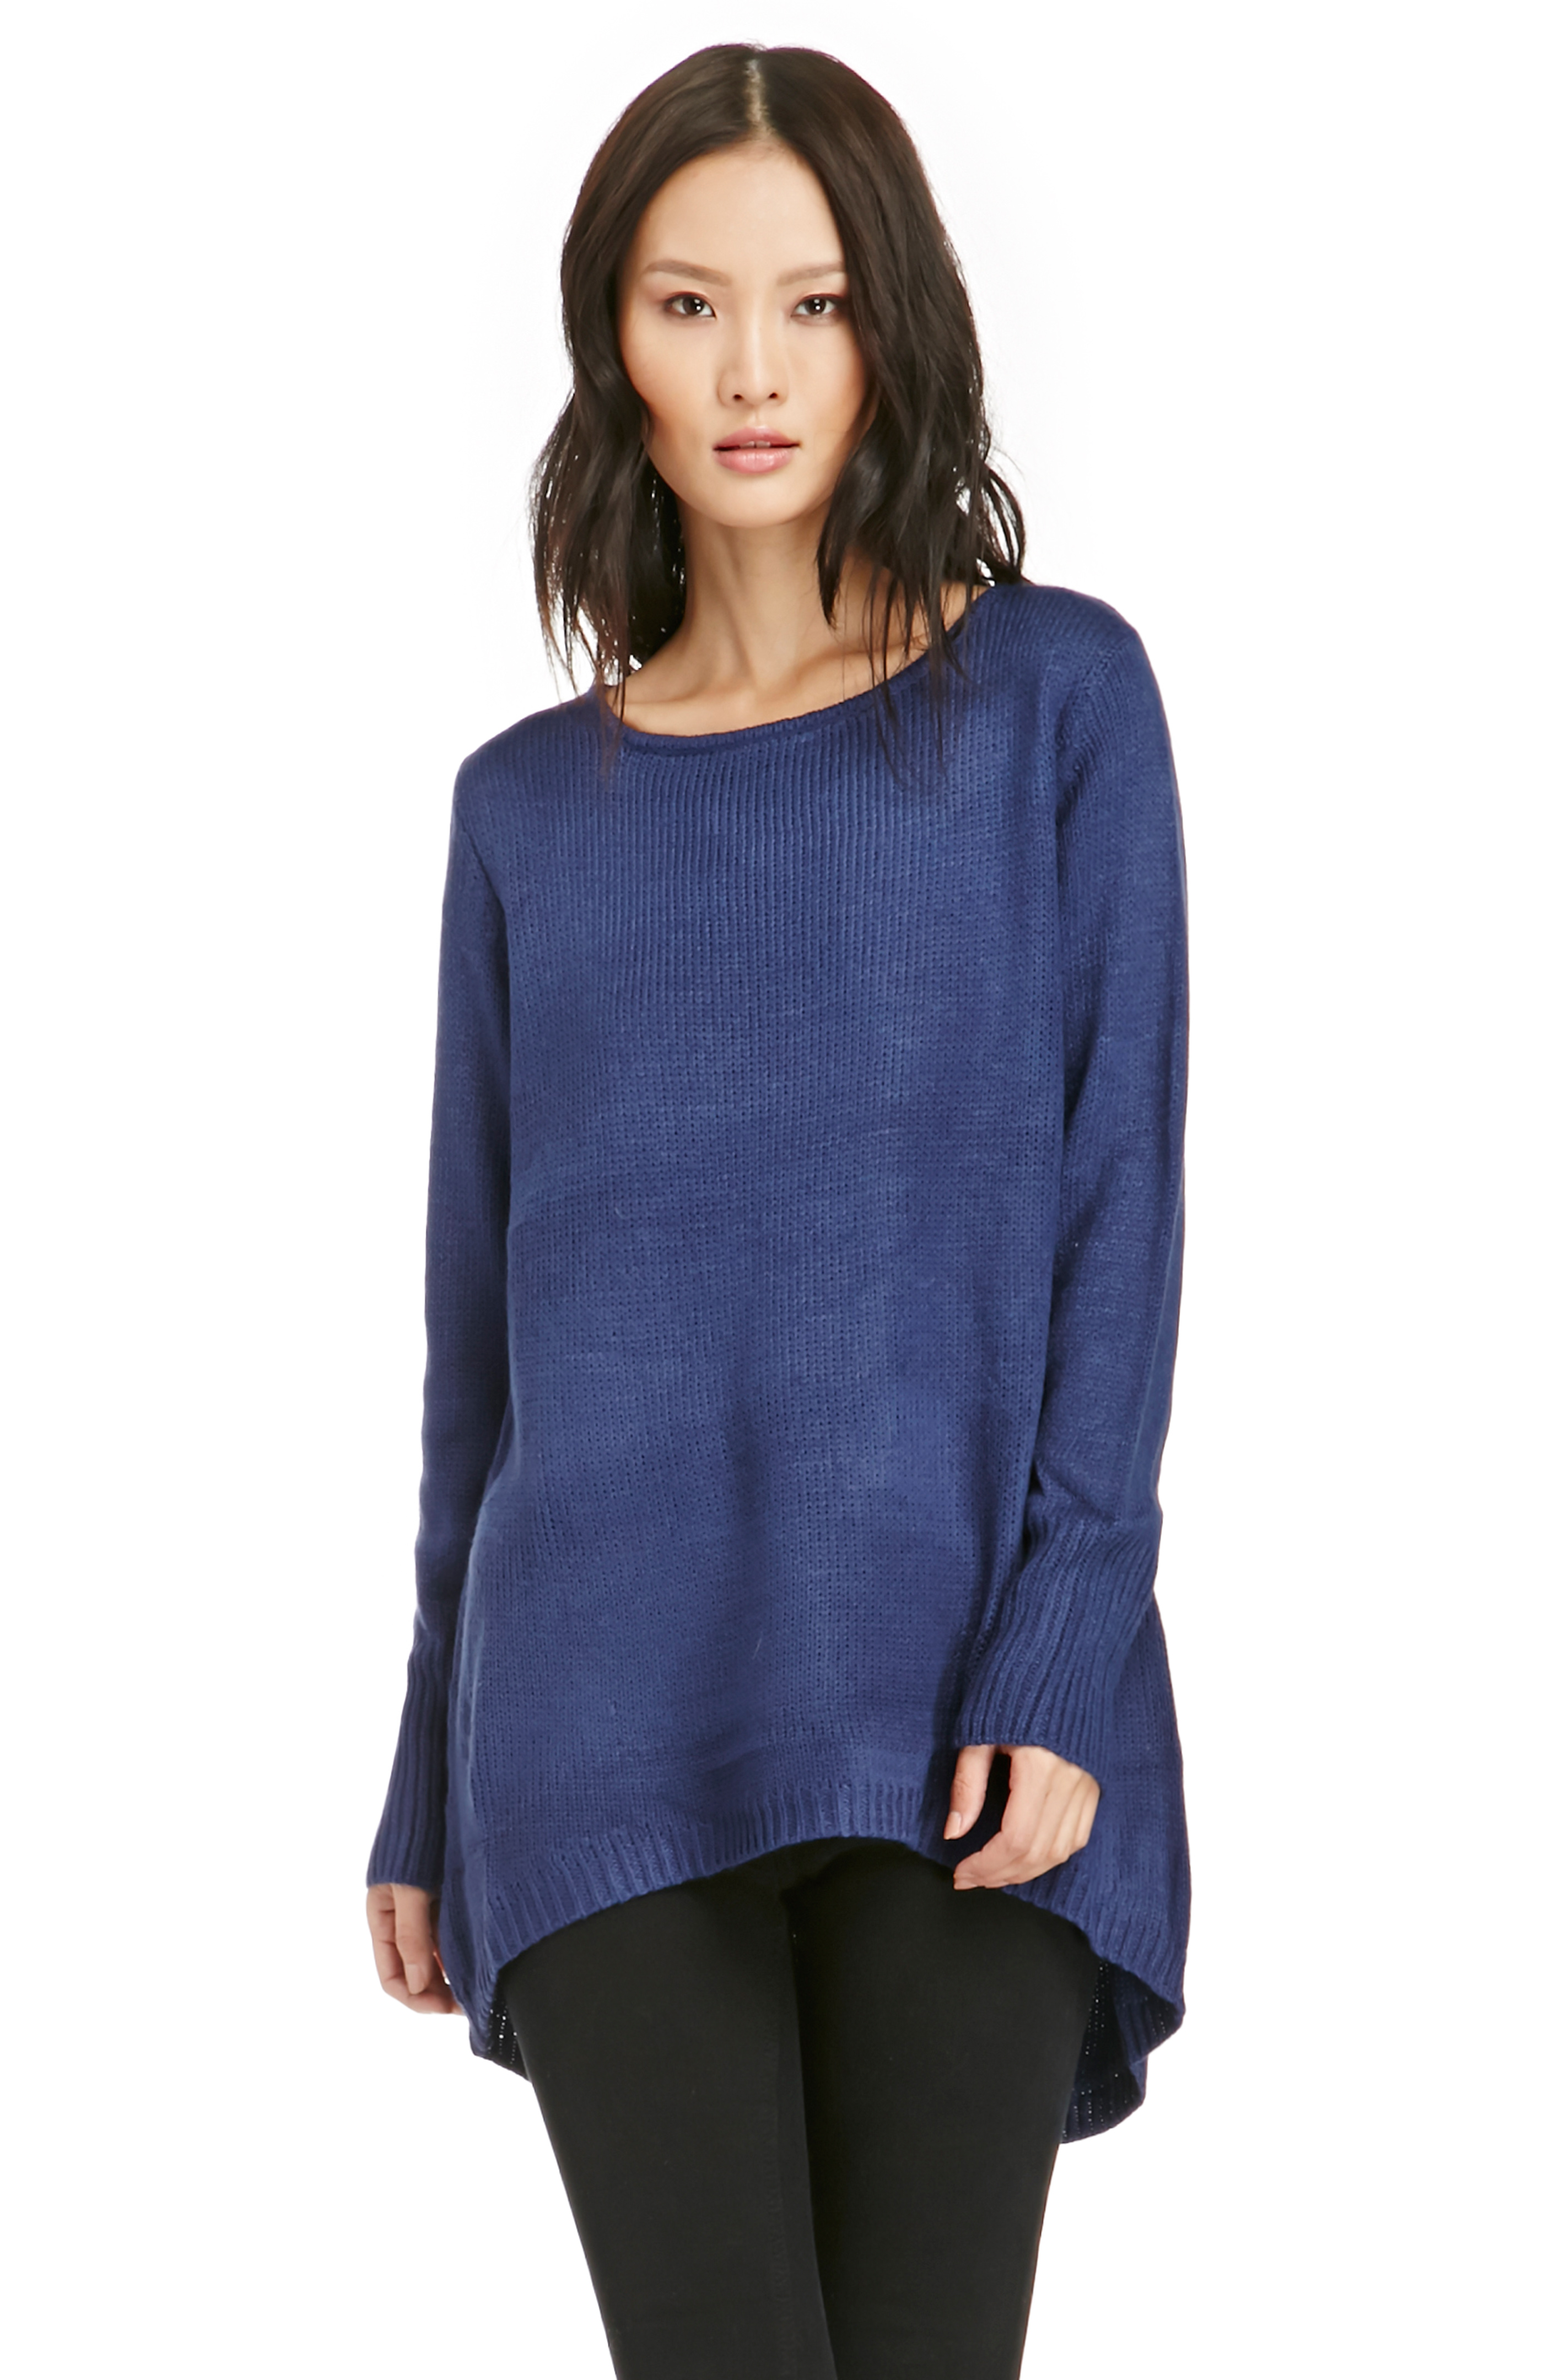 Oversized Knit Pullover Sweater in Navy | DAILYLOOK